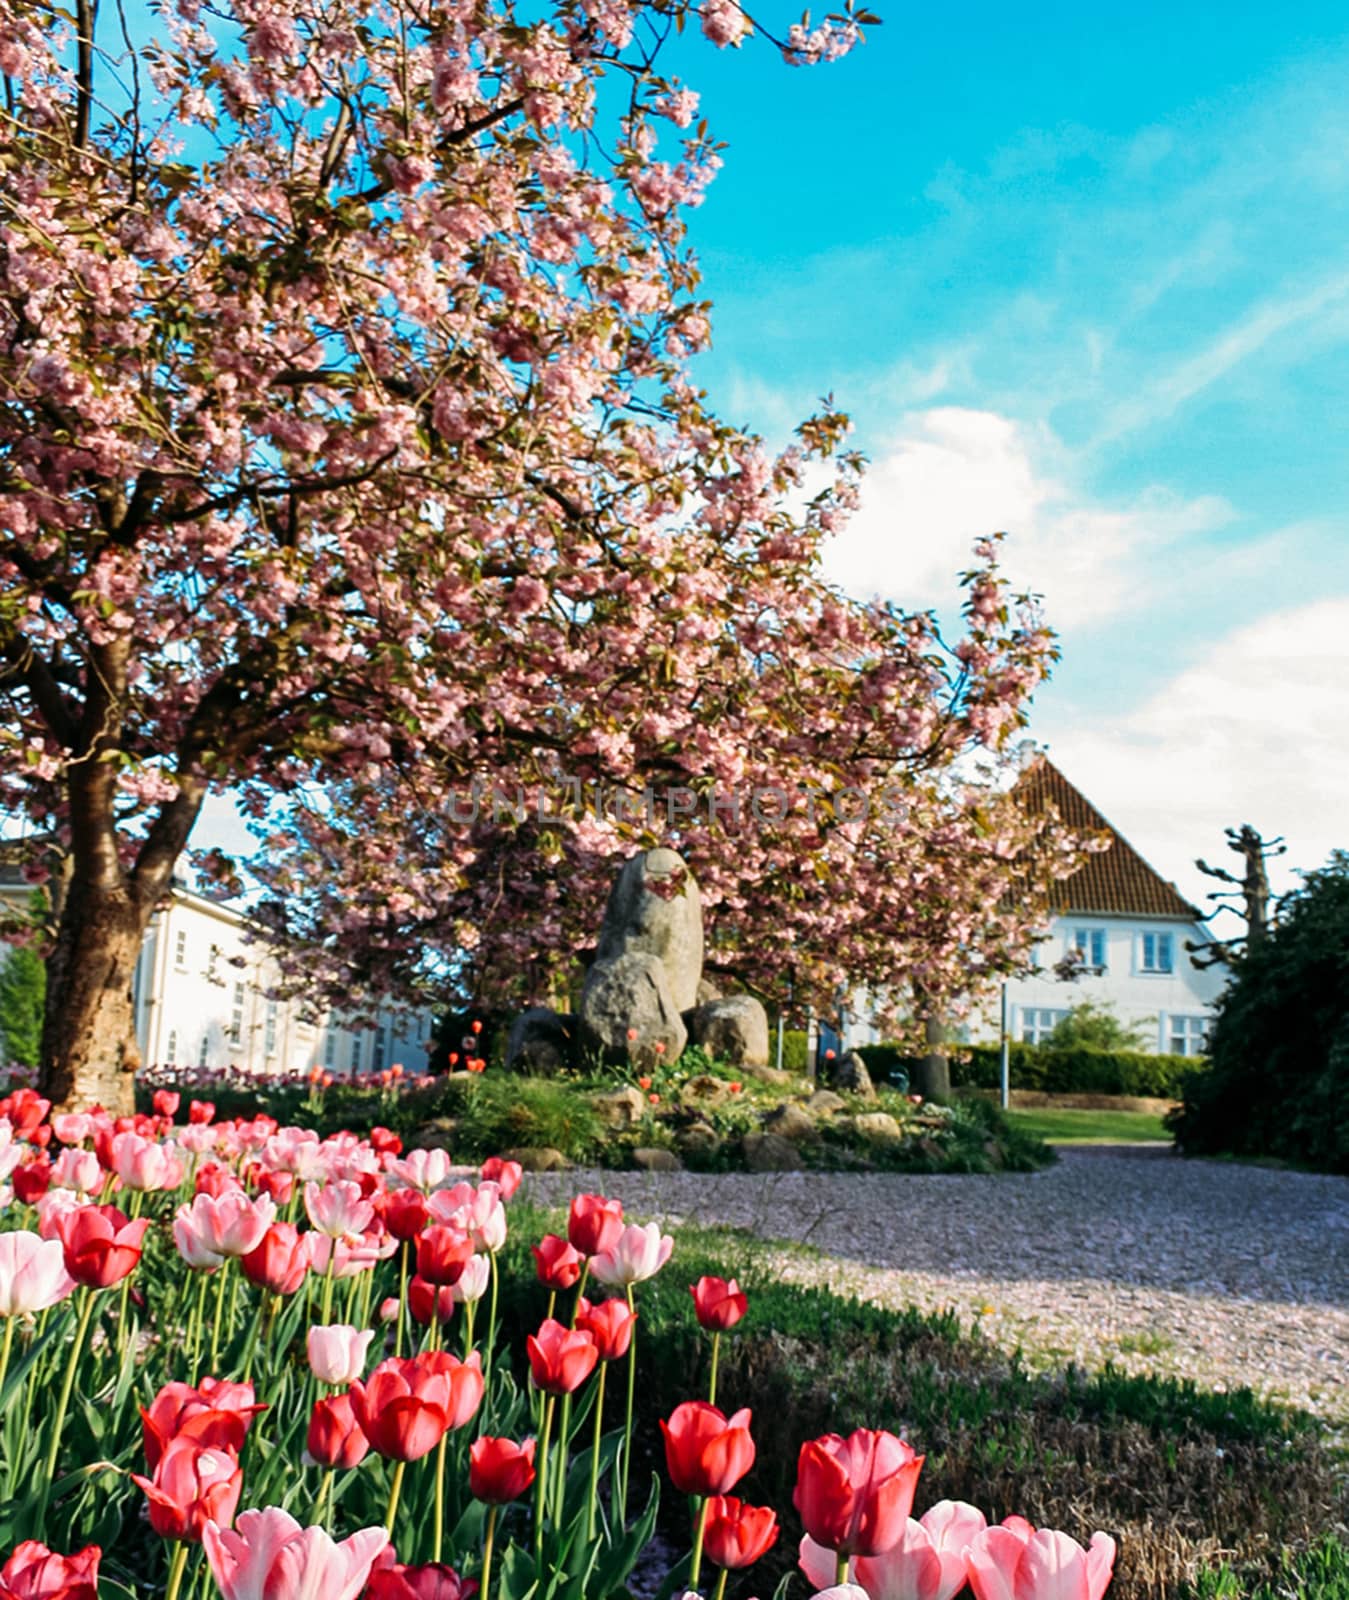 Tulips and blosom tree on traditional Danish rural street 